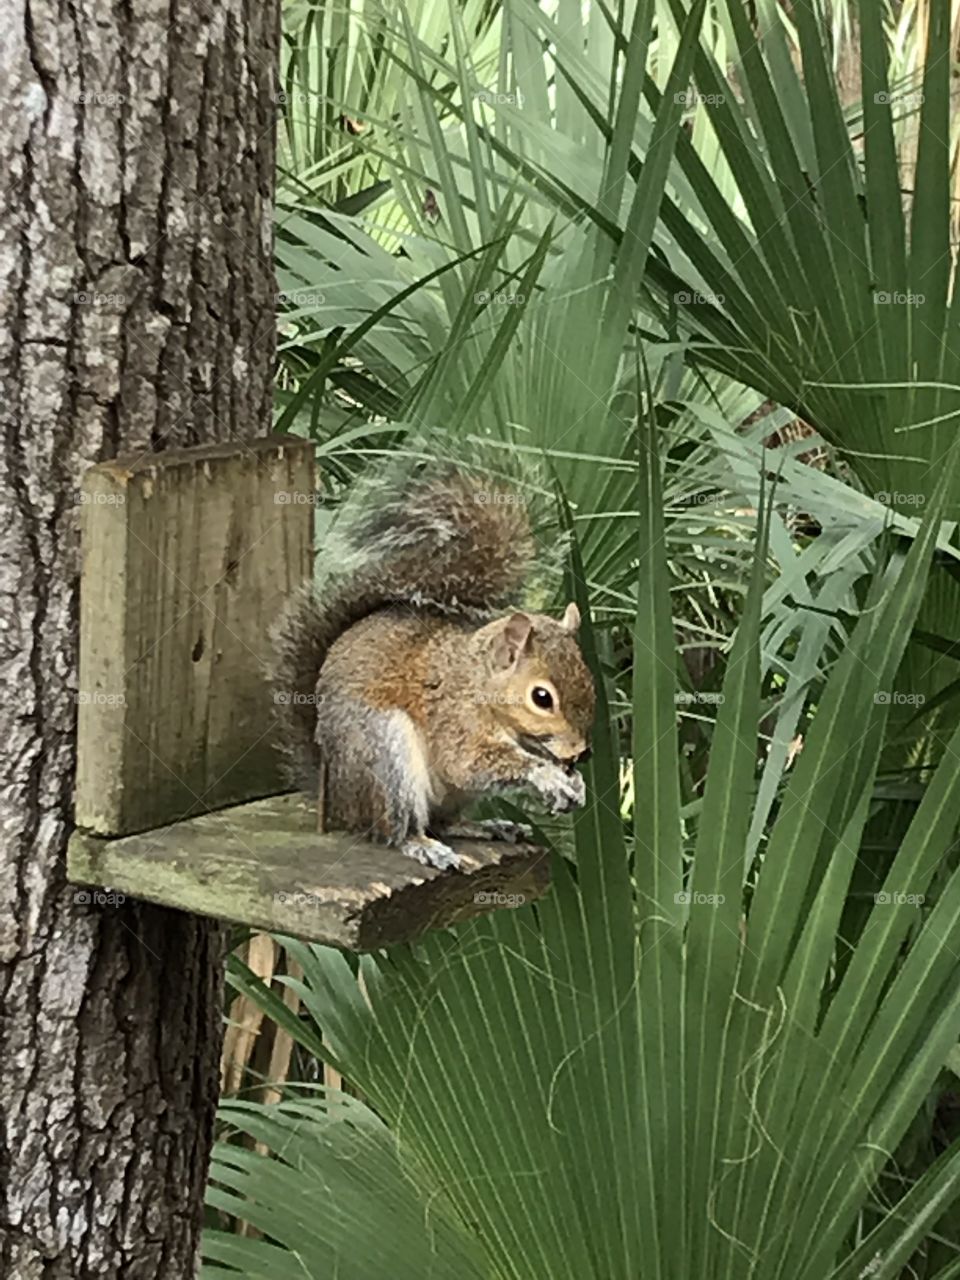 A Squirrel enjoying his lunch among the palms in the woods